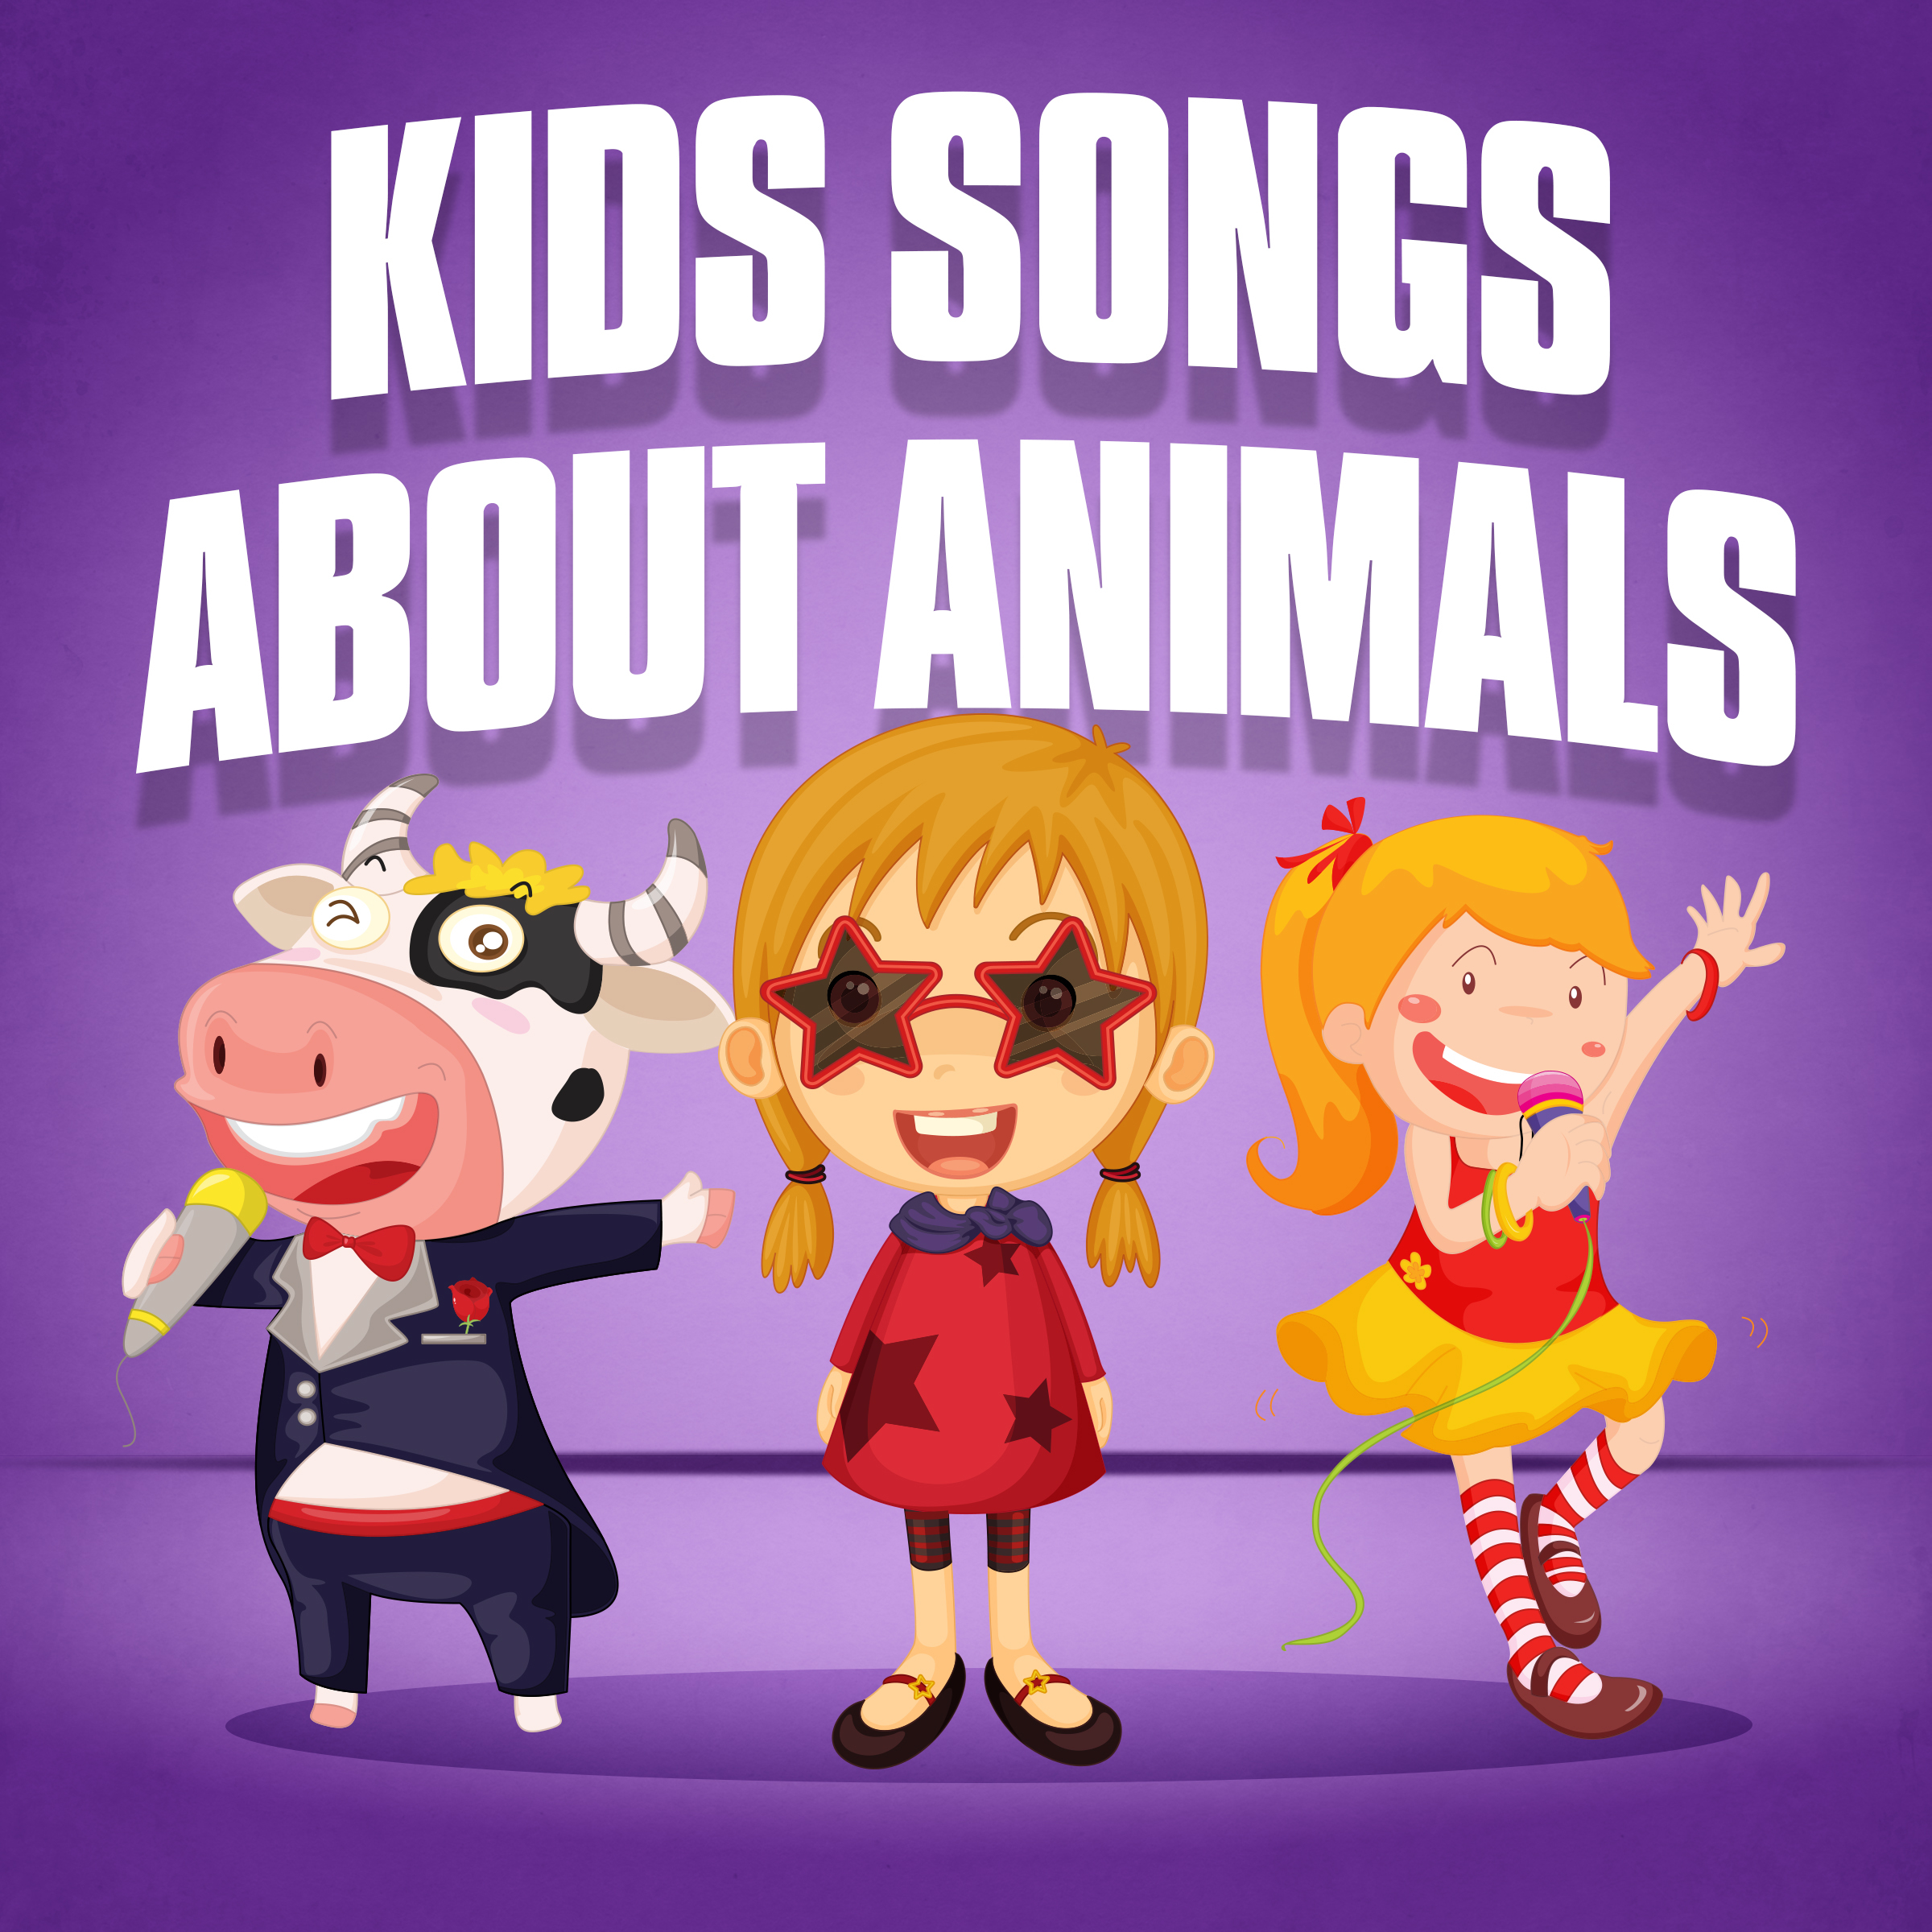 Kids songs about animals